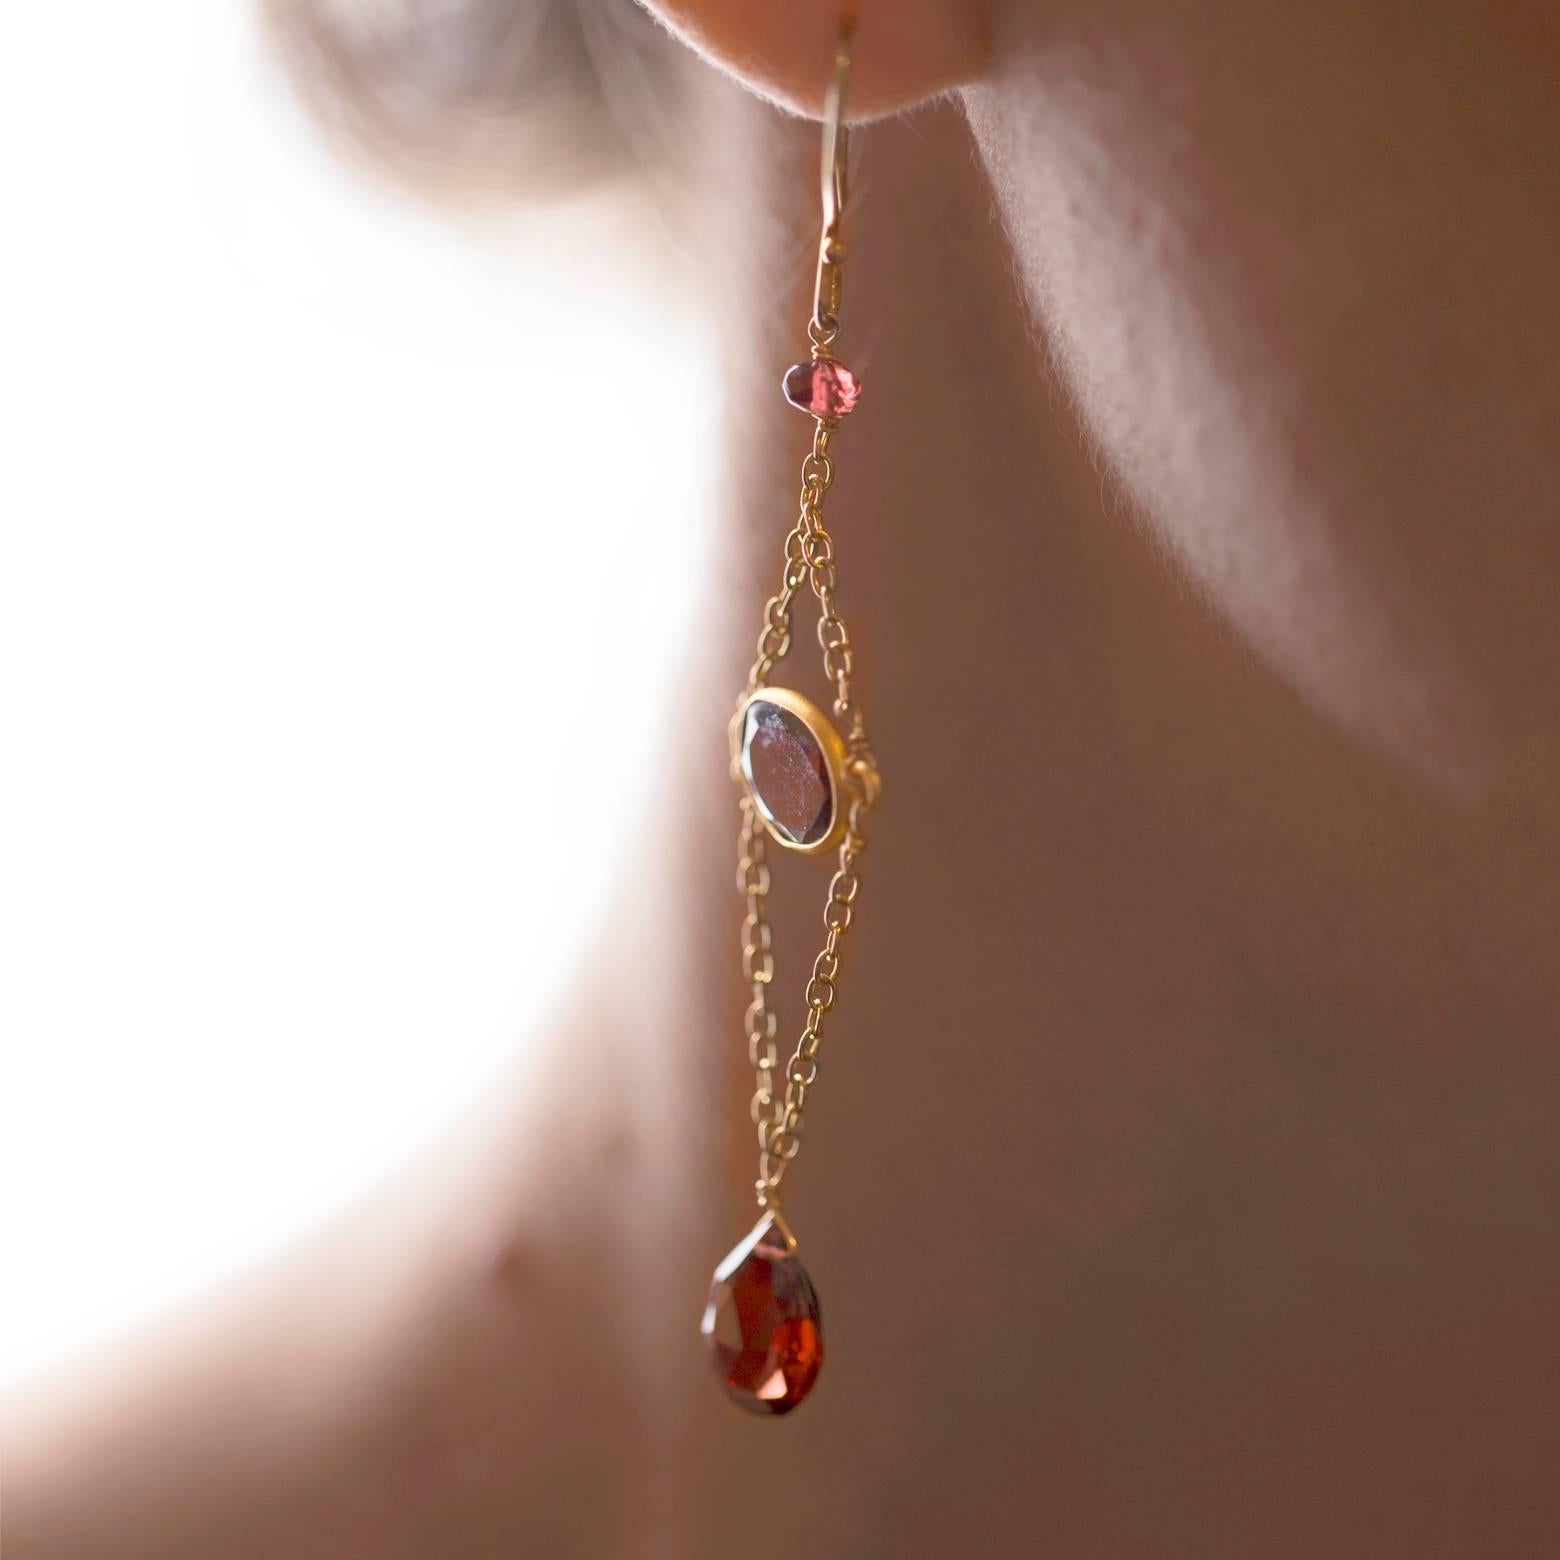 Garnet and Gold Chain Earrings with Faceted Bead Briolettes 1